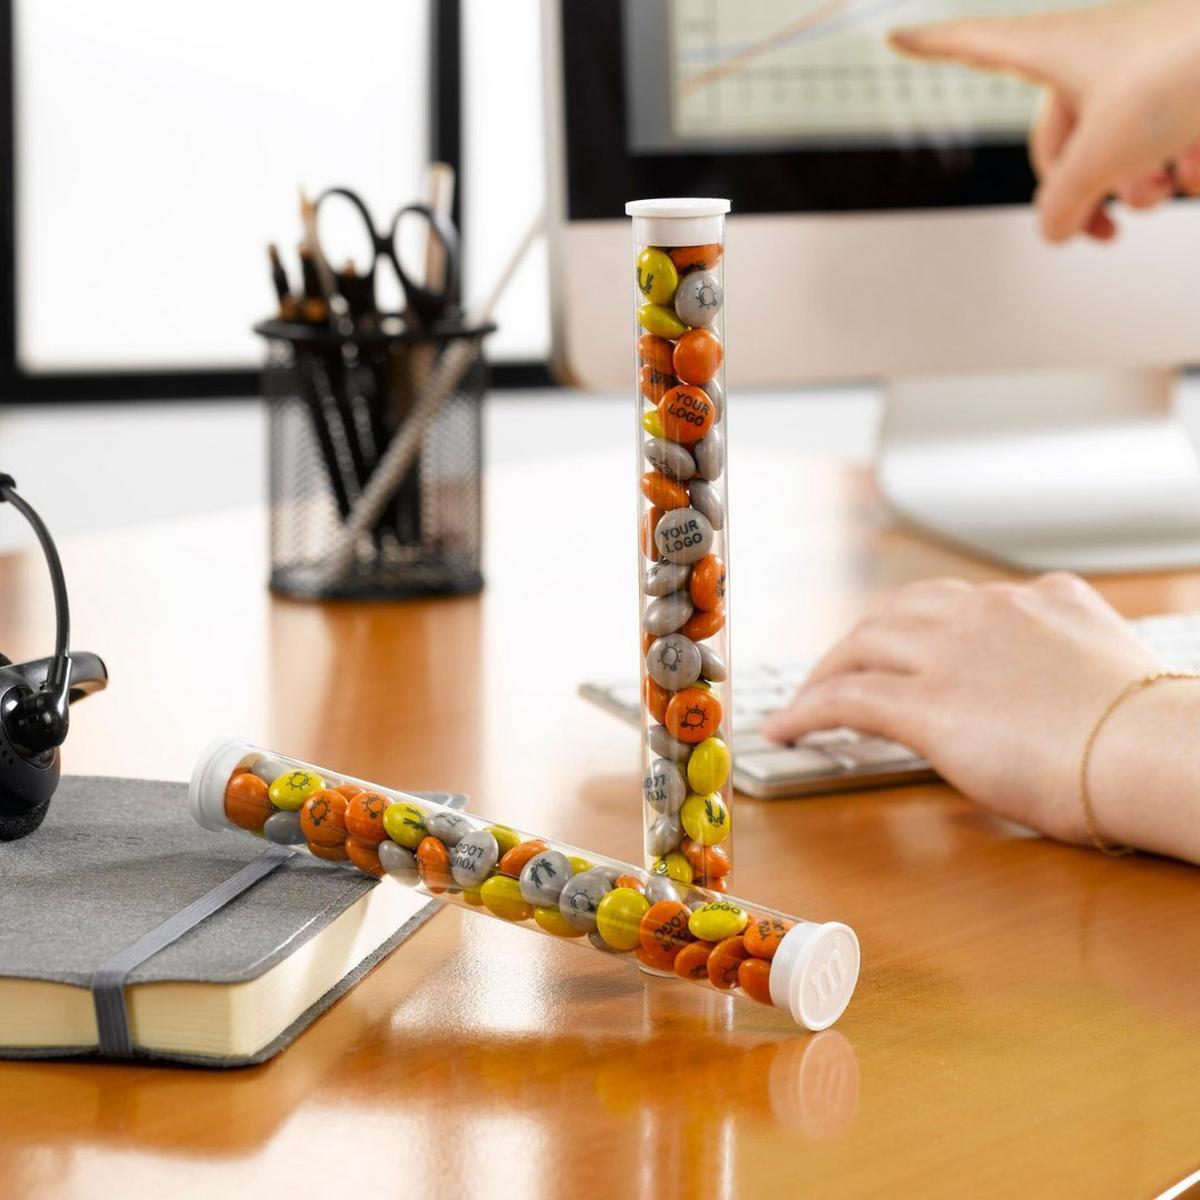 Two favor tubes filled with M&M'S on a desk as someone works at a computer.